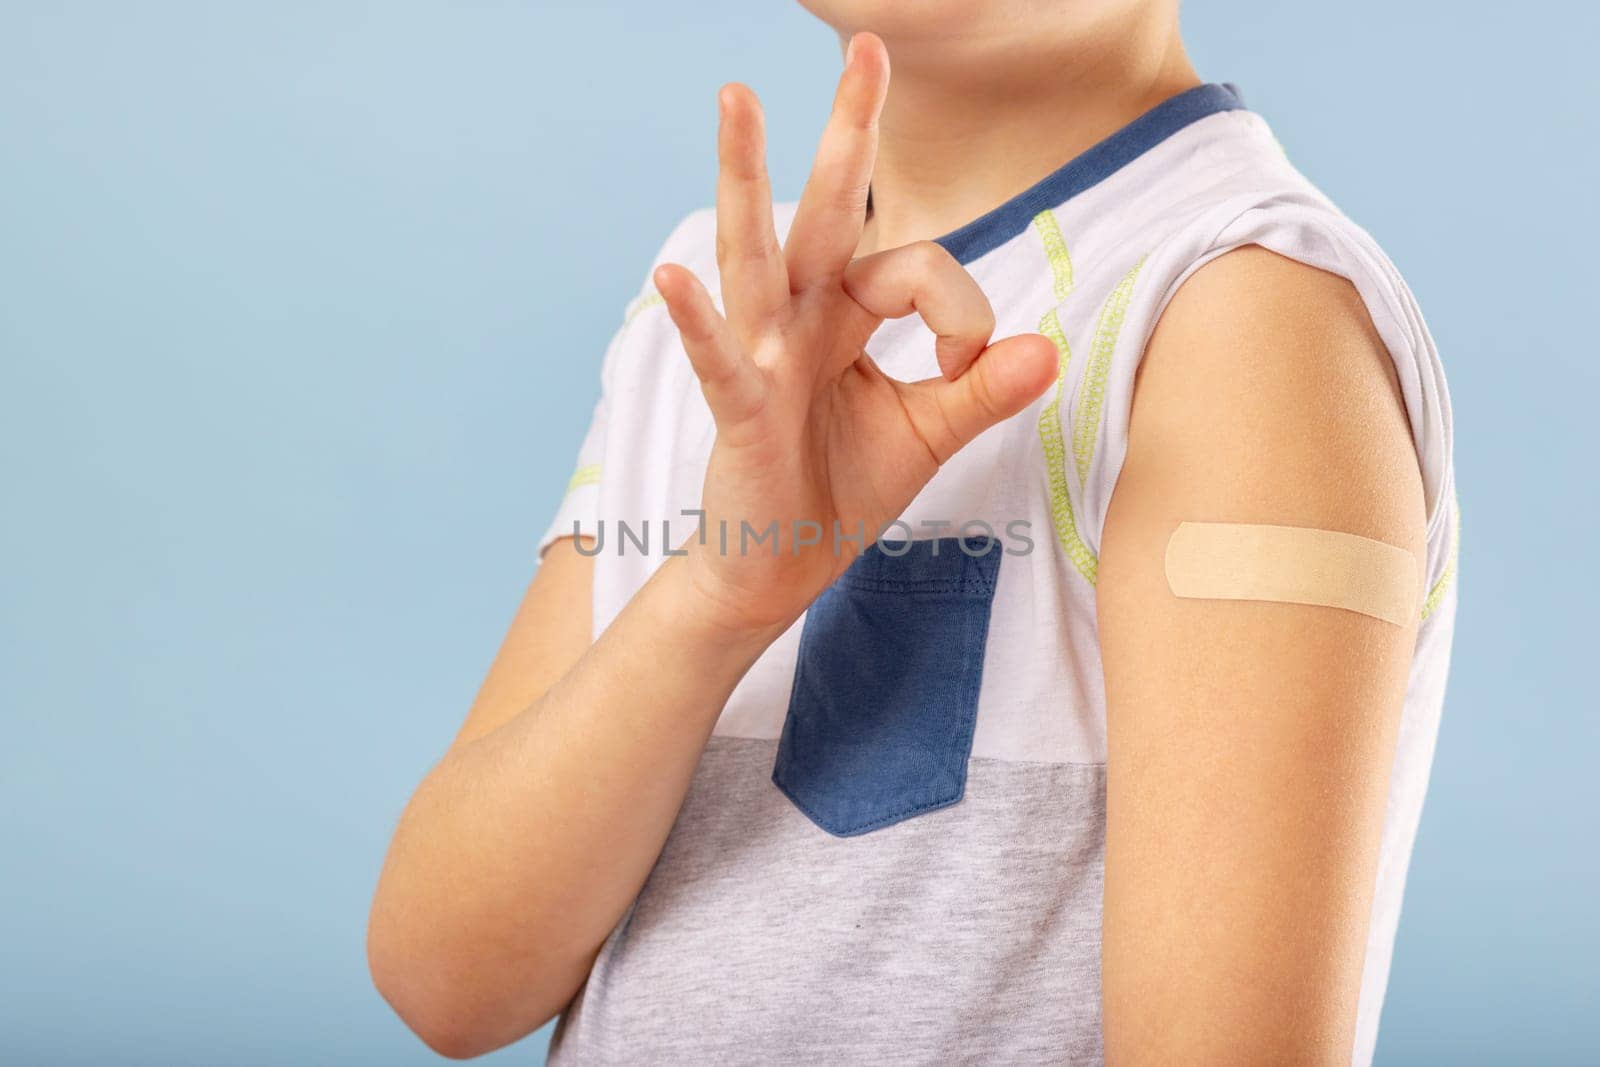 Vaccination of children. Happy vaccinated kid boy is gesturing okay and showing arm with adhesive bandage after vaccine injection. Kids and covid-19 prevention, antiviral immunization.